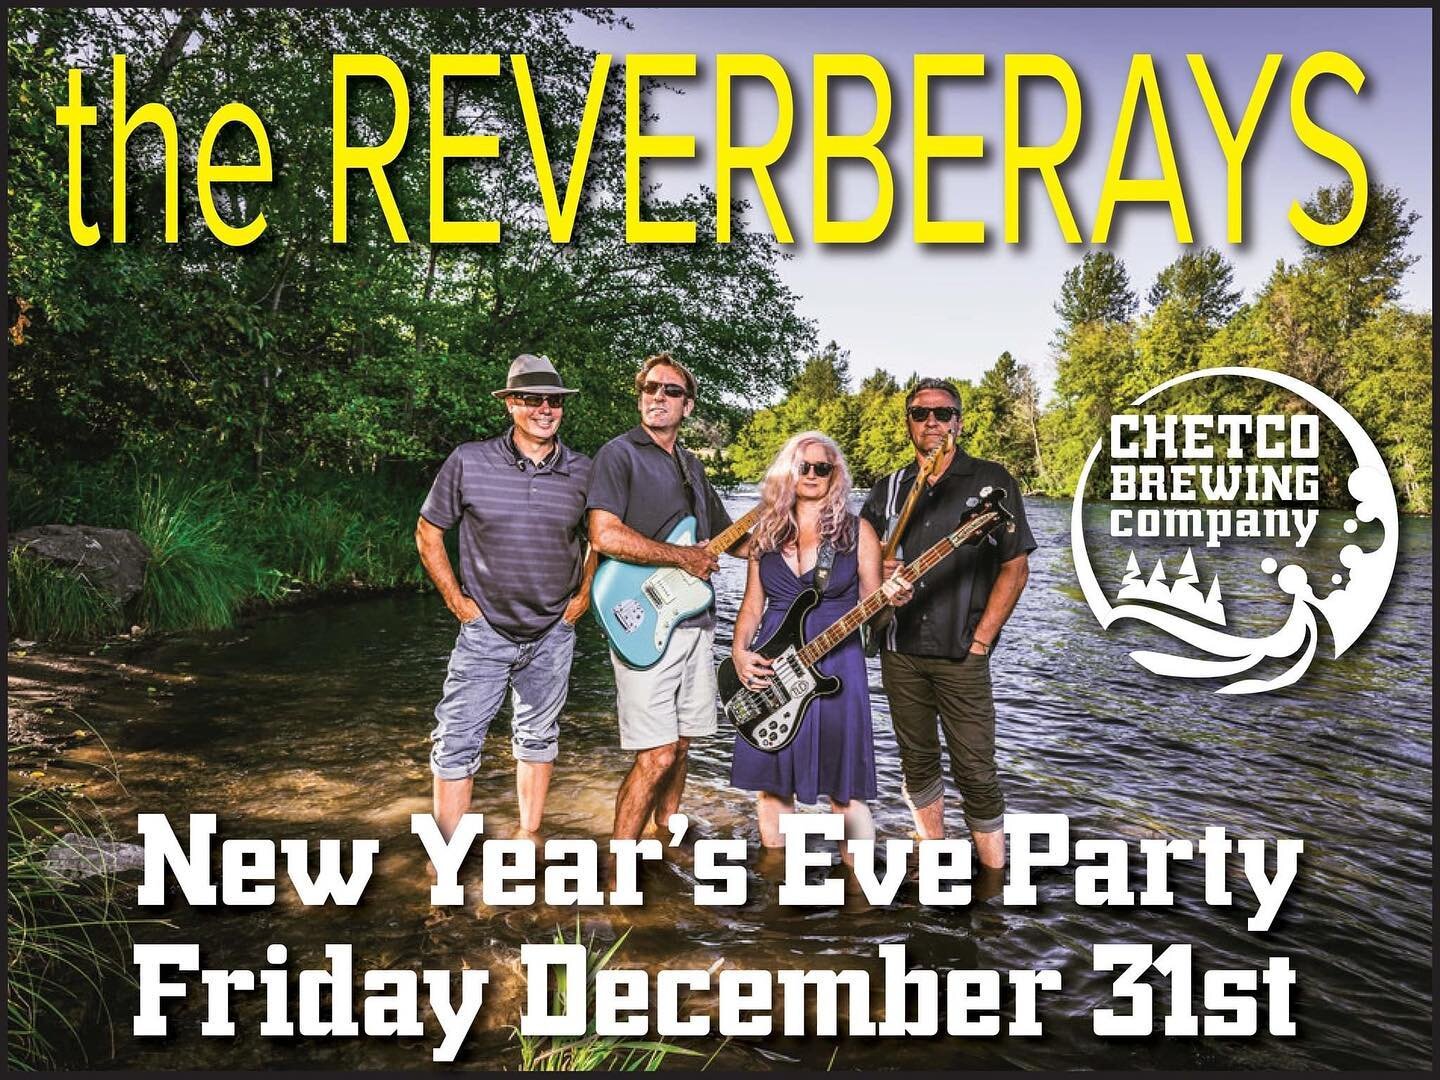 Super stoked for NYE @chetcobrewing in Brookings!! Join us from 6-10 pm Dec. 31st for surf tunes and some of the best beer on the planet!  #seriouslygreatbeer #surfmusic #thereverberays #newyearseveinbrookings #celebrate2022withus